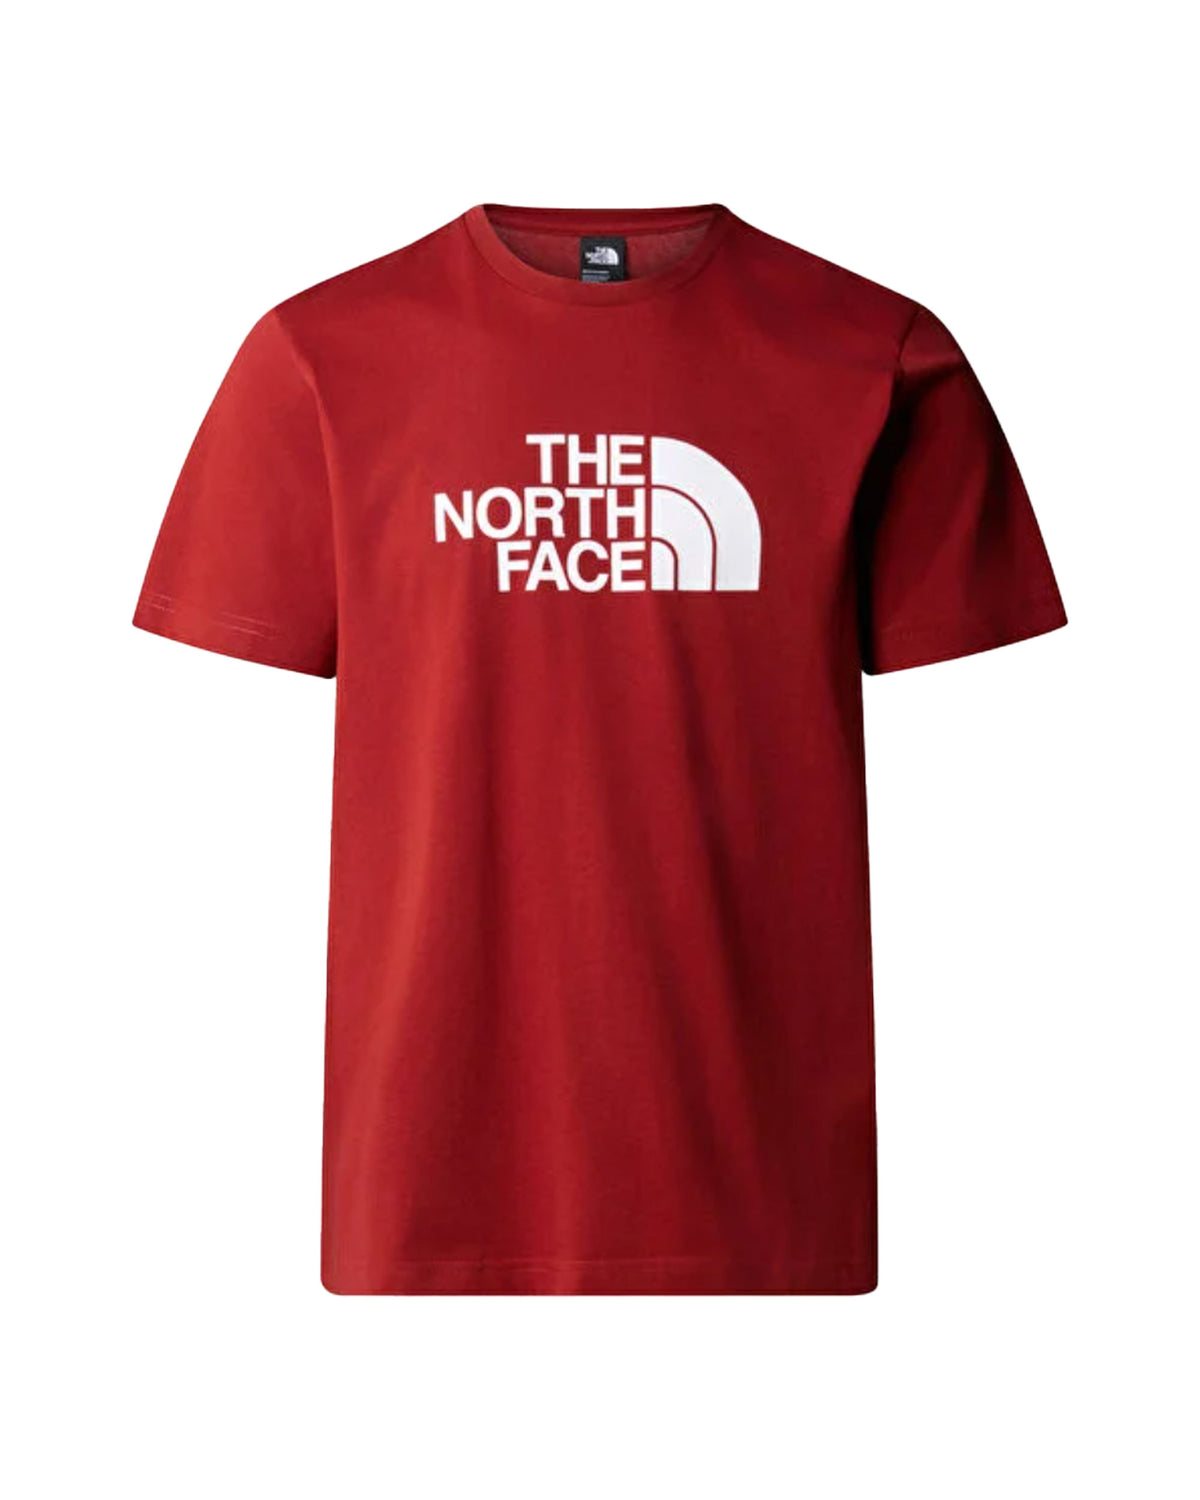 T-Shirt Uomo The North Face Easy Iron Red